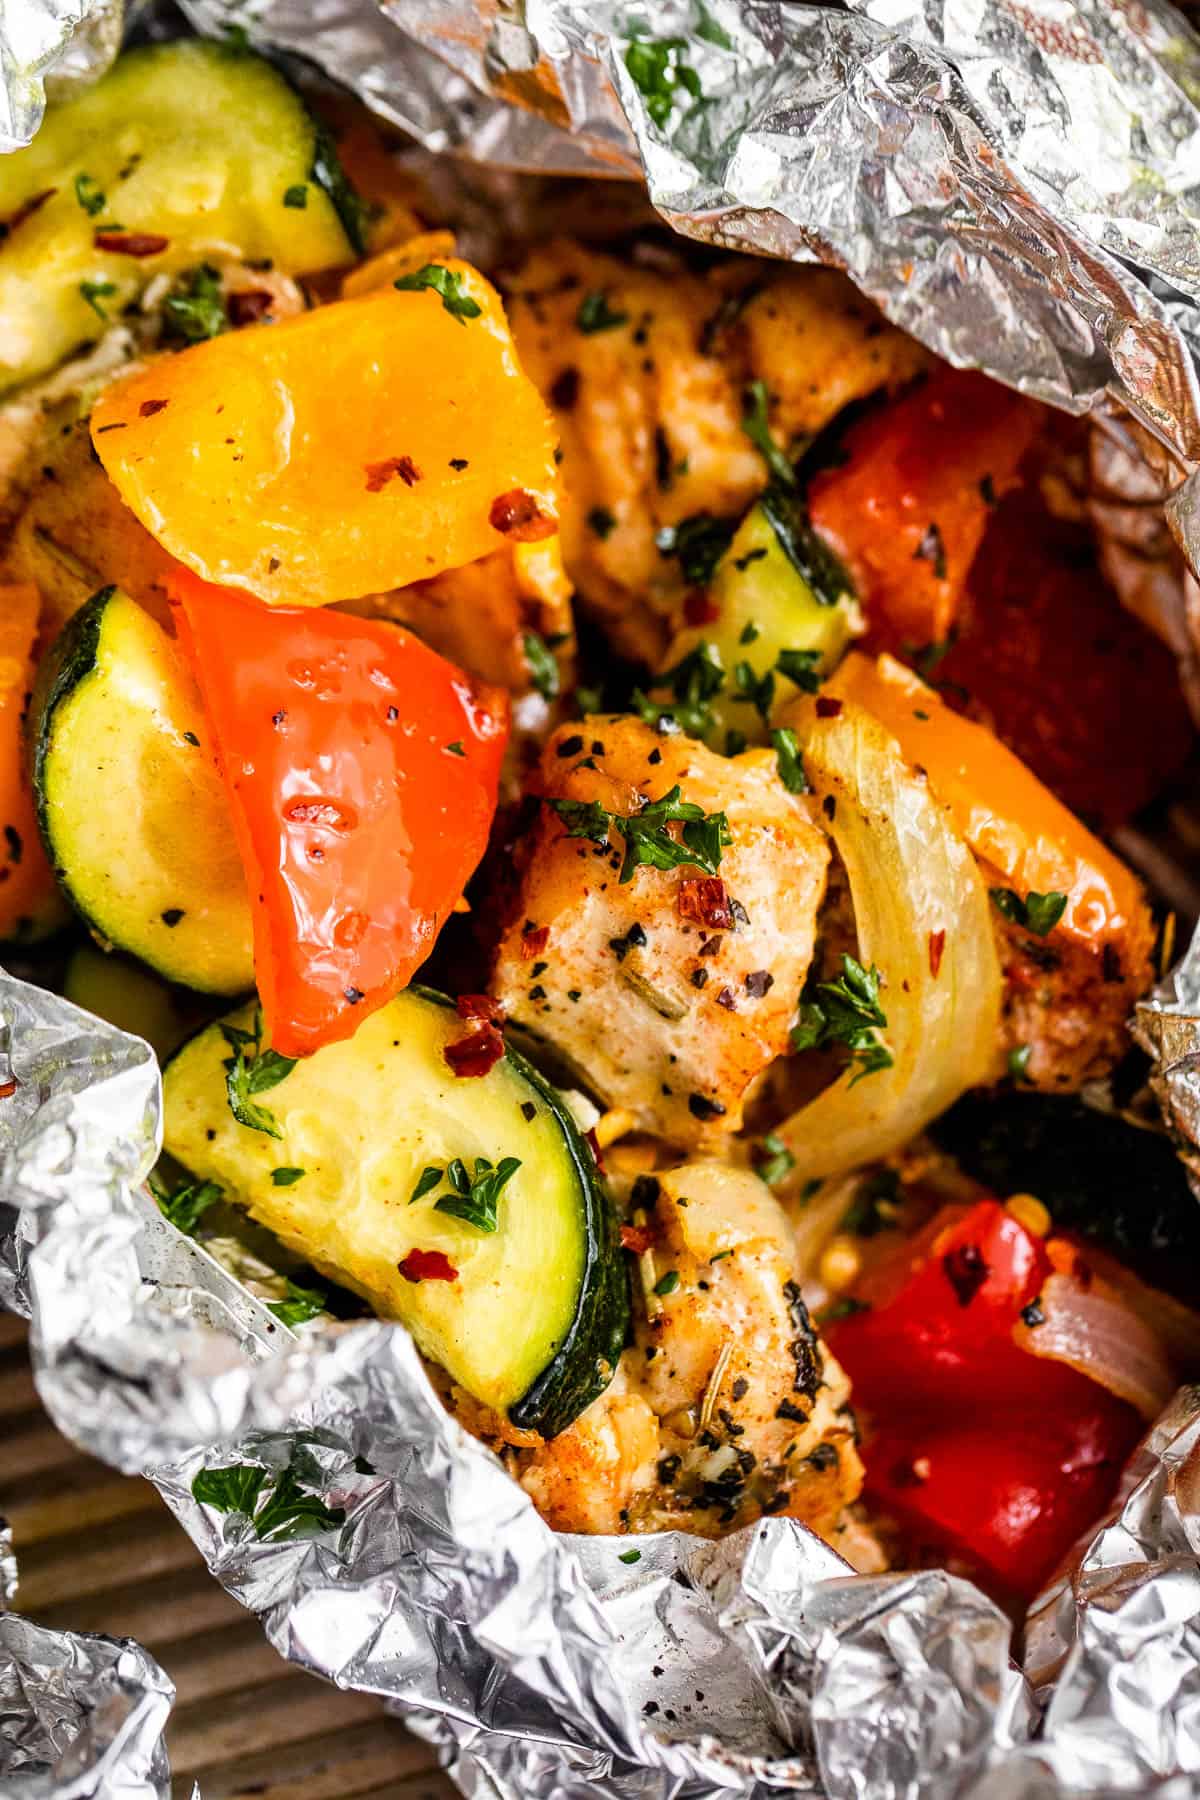 up close shot of diced chicken, sliced zucchini, and sliced peppers all layered in an aluminum foil packet.